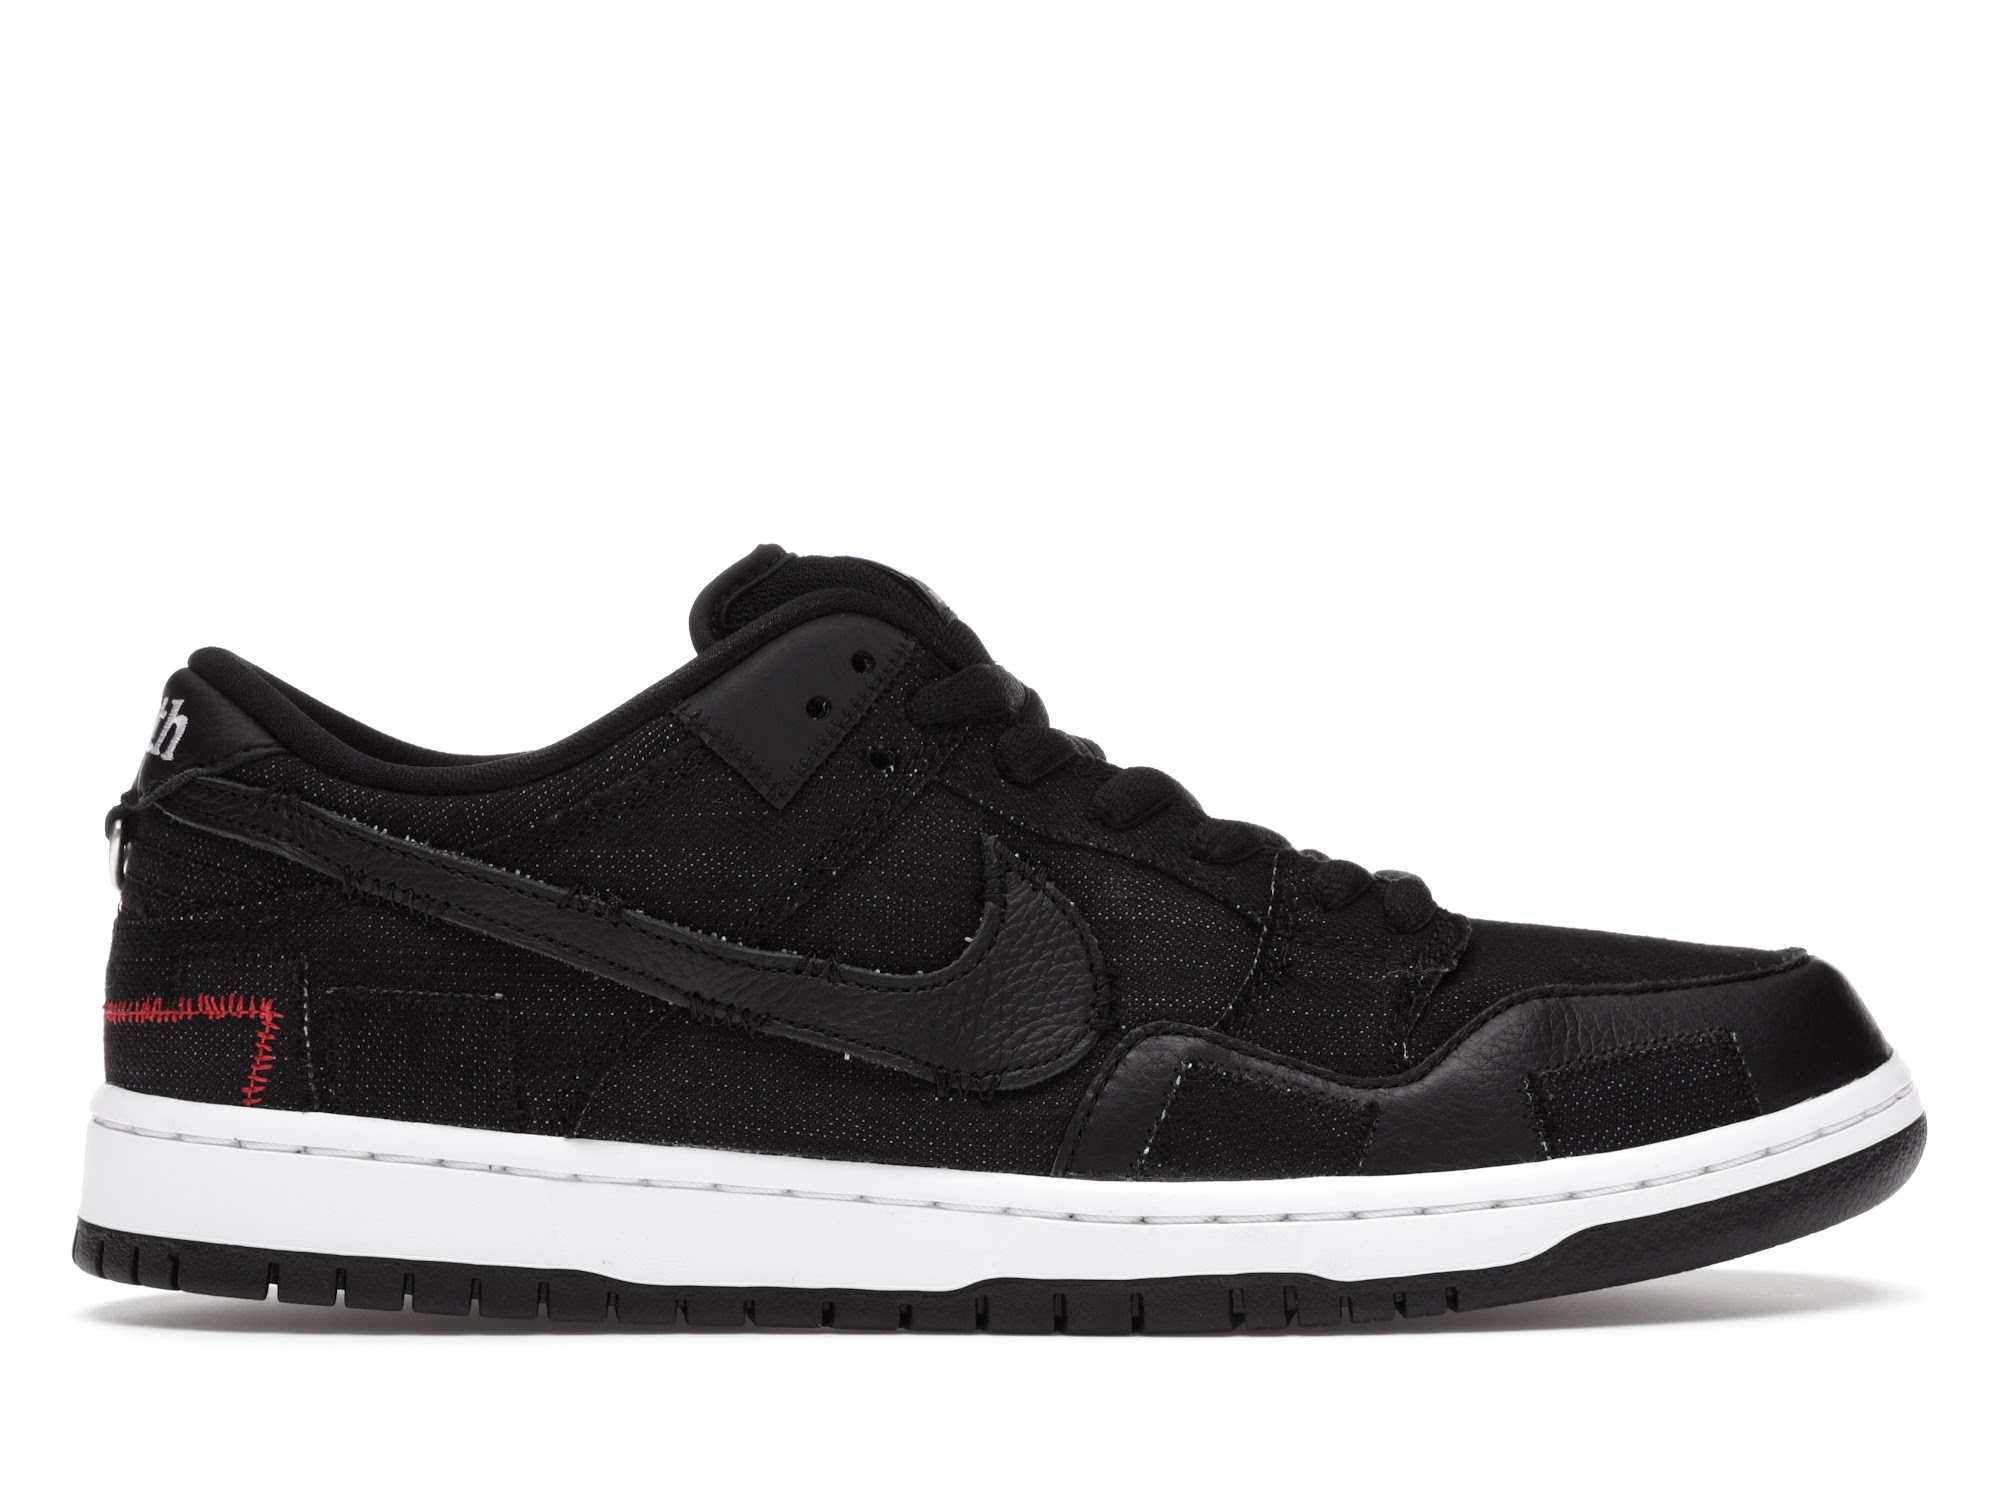 Wasted Youth NIKE DUNK LOW PRO ダンク 25.5